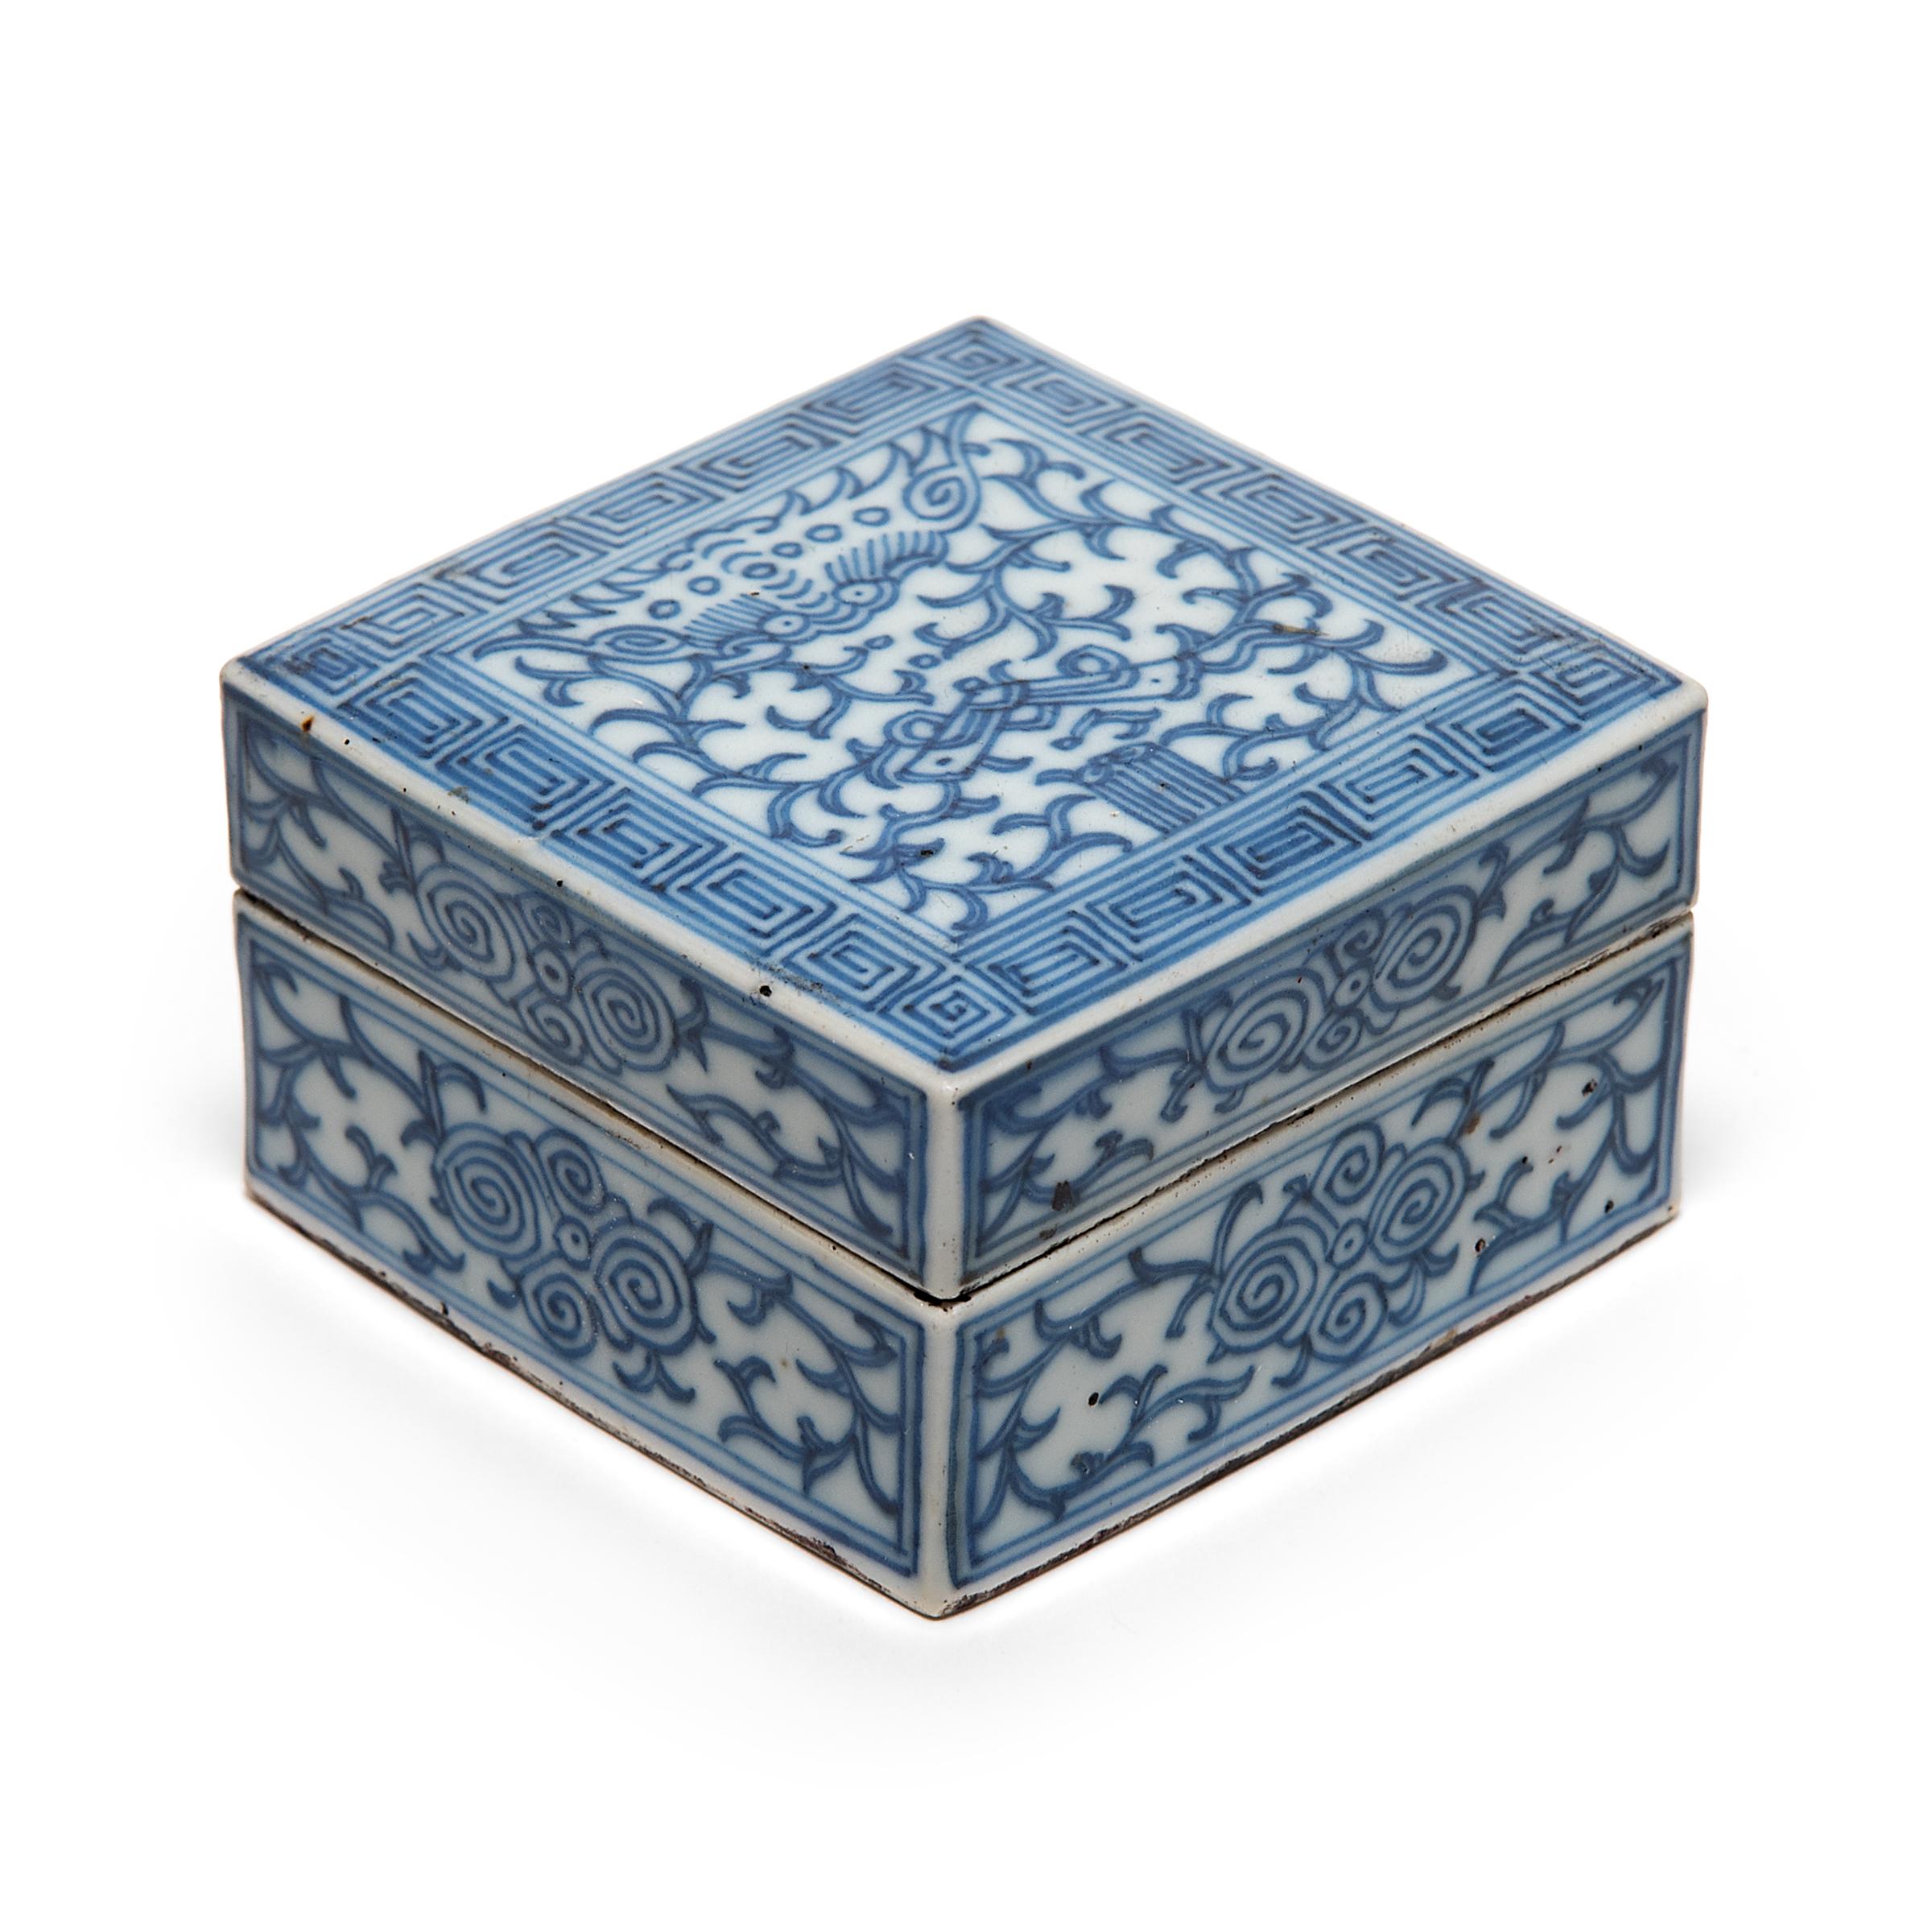 This petite blue and white porcelain box once contained the ink used by a Qing-dynasty scholar or official to mark his works with a personalized seal. The final addition to any official document or calligraphy painting, seal marks conveyed the